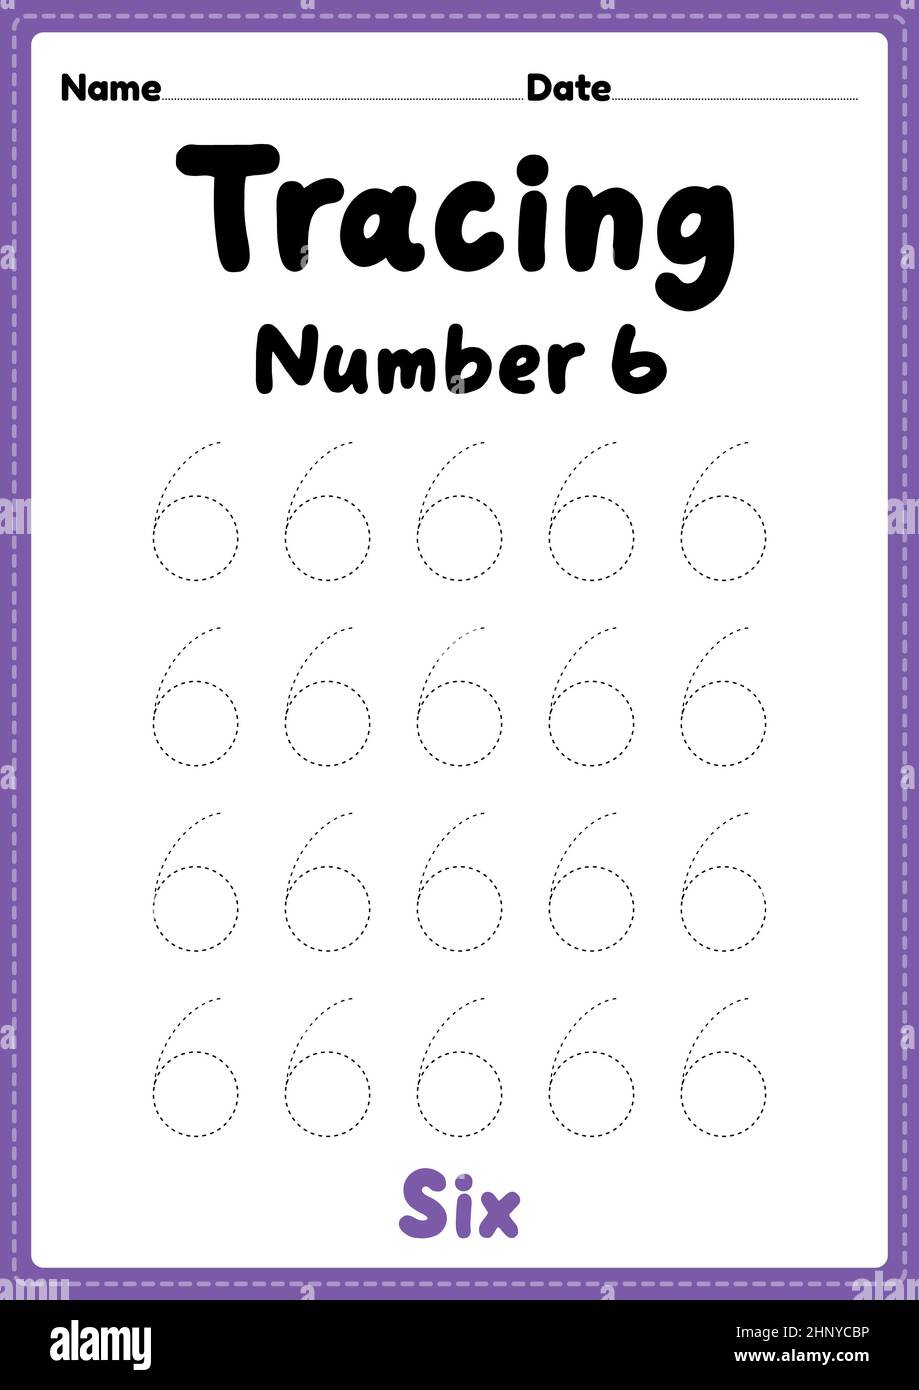 Tracing number 6 worksheet for kindergarten, preschool and Montessori kids for learning numbers and handwriting practice activities. Stock Photo